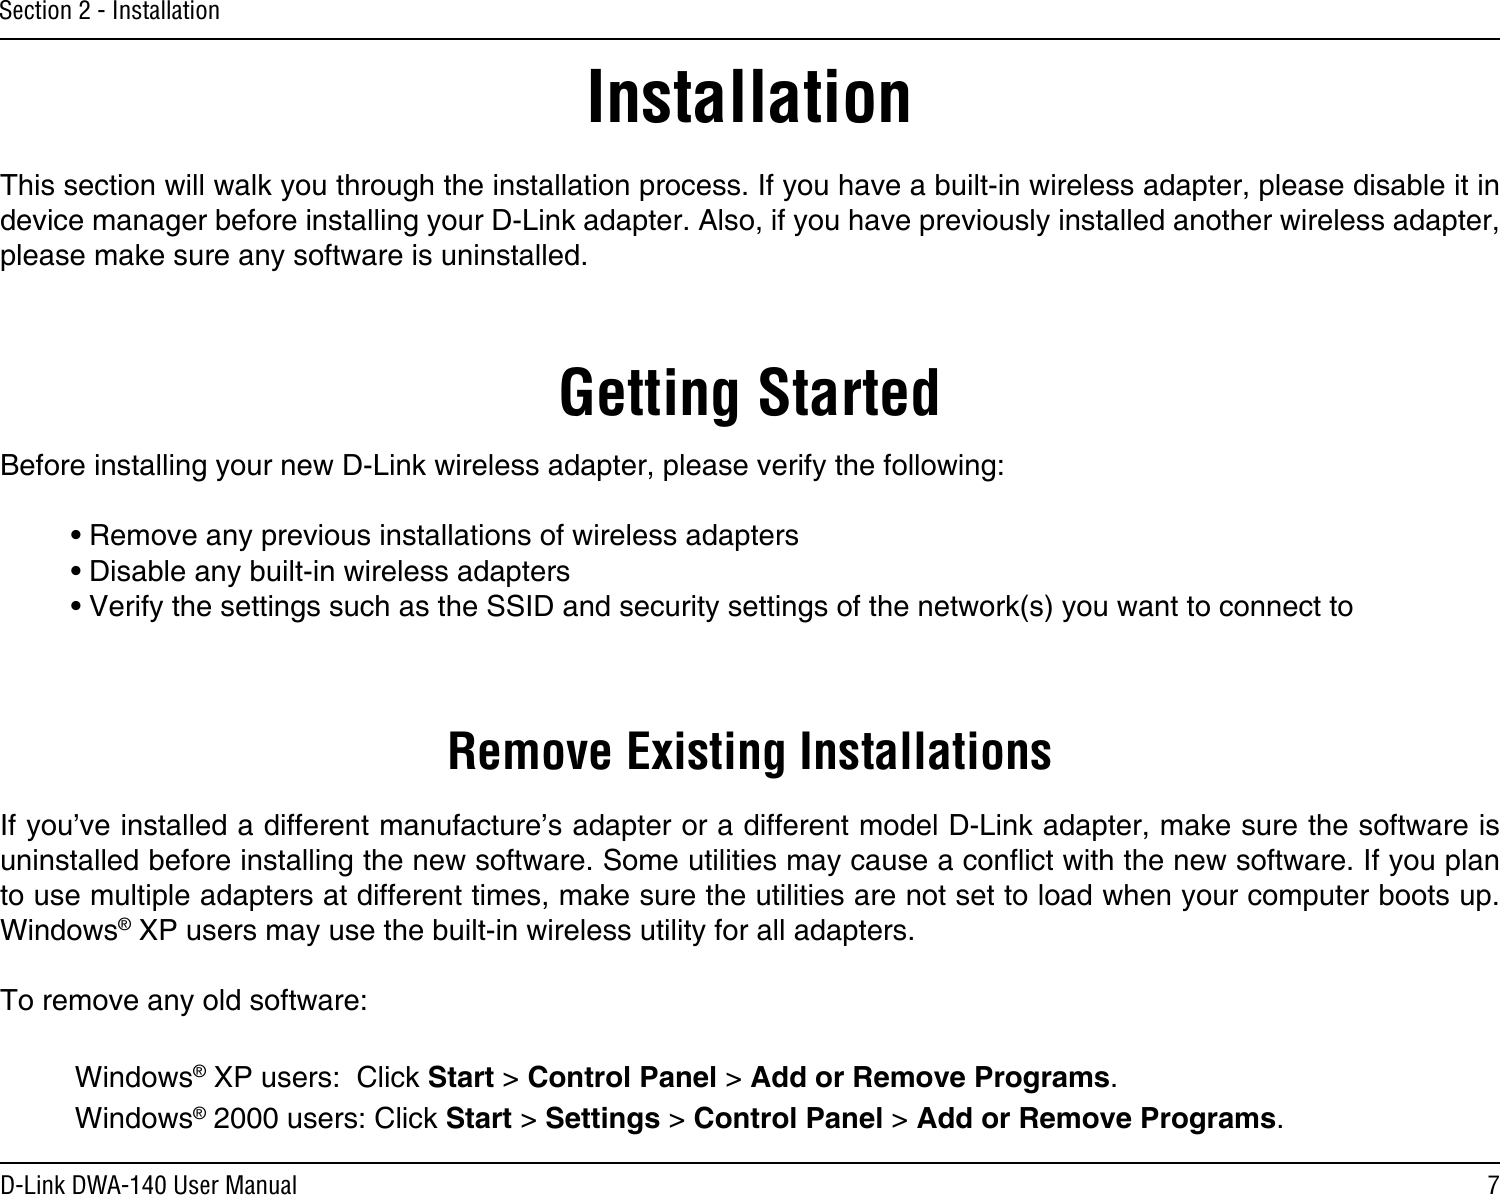 7D-Link DWA-140 User ManualSection 2 - InstallationGetting StartedInstallationThis section will walk you through the installation process. If you have a built-in wireless adapter, please disable it in device manager before installing your D-Link adapter. Also, if you have previously installed another wireless adapter, please make sure any software is uninstalled.Before installing your new D-Link wireless adapter, please verify the following:• Remove any previous installations of wireless adapters• Disable any built-in wireless adapters • Verify the settings such as the SSID and security settings of the network(s) you want to connect toRemove Existing InstallationsIf you’ve installed a different manufacture’s adapter or a different model D-Link adapter, make sure the software is uninstalled before installing the new software. Some utilities may cause a conict with the new software. If you plan to use multiple adapters at different times, make sure the utilities are not set to load when your computer boots up. Windows® XP users may use the built-in wireless utility for all adapters.To remove any old software:  Windows® XP users:  Click Start &gt; Control Panel &gt; Add or Remove Programs.   Windows® 2000 users: Click Start &gt; Settings &gt; Control Panel &gt; Add or Remove Programs.